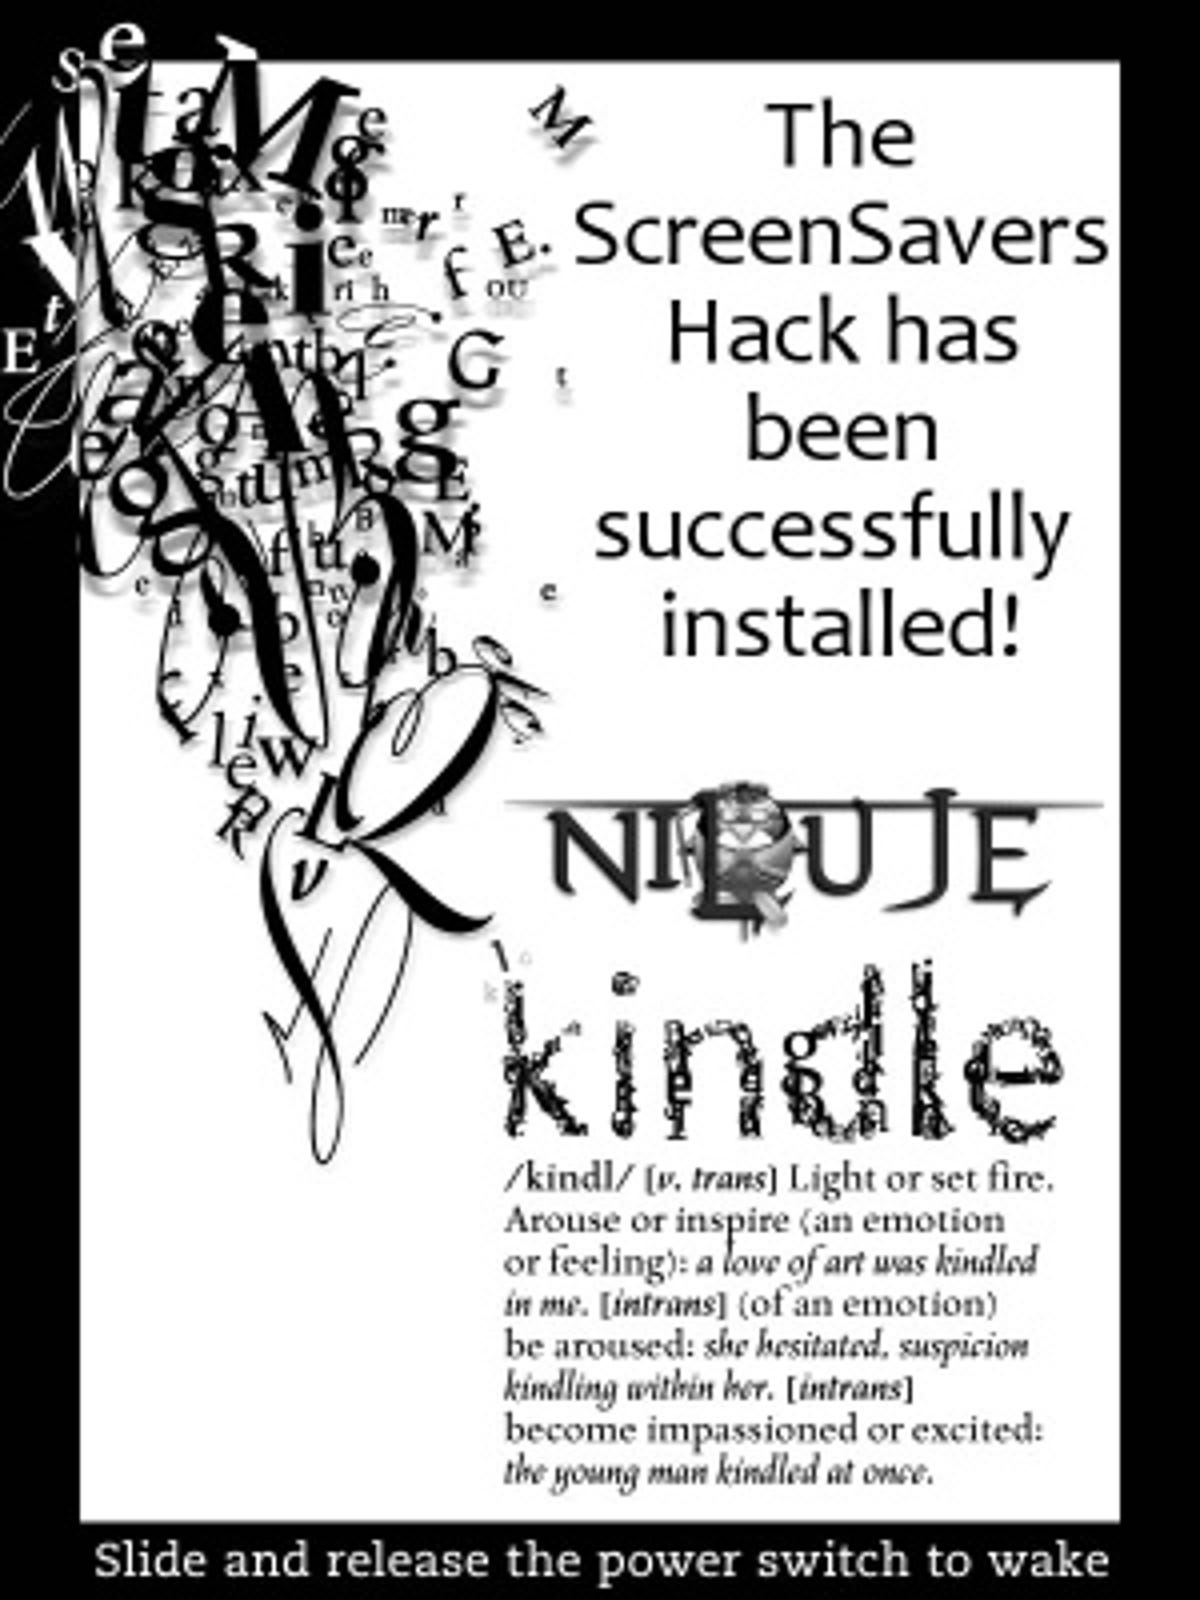 How to change the Amazon Kindle's screensaver: placeholder screensaver